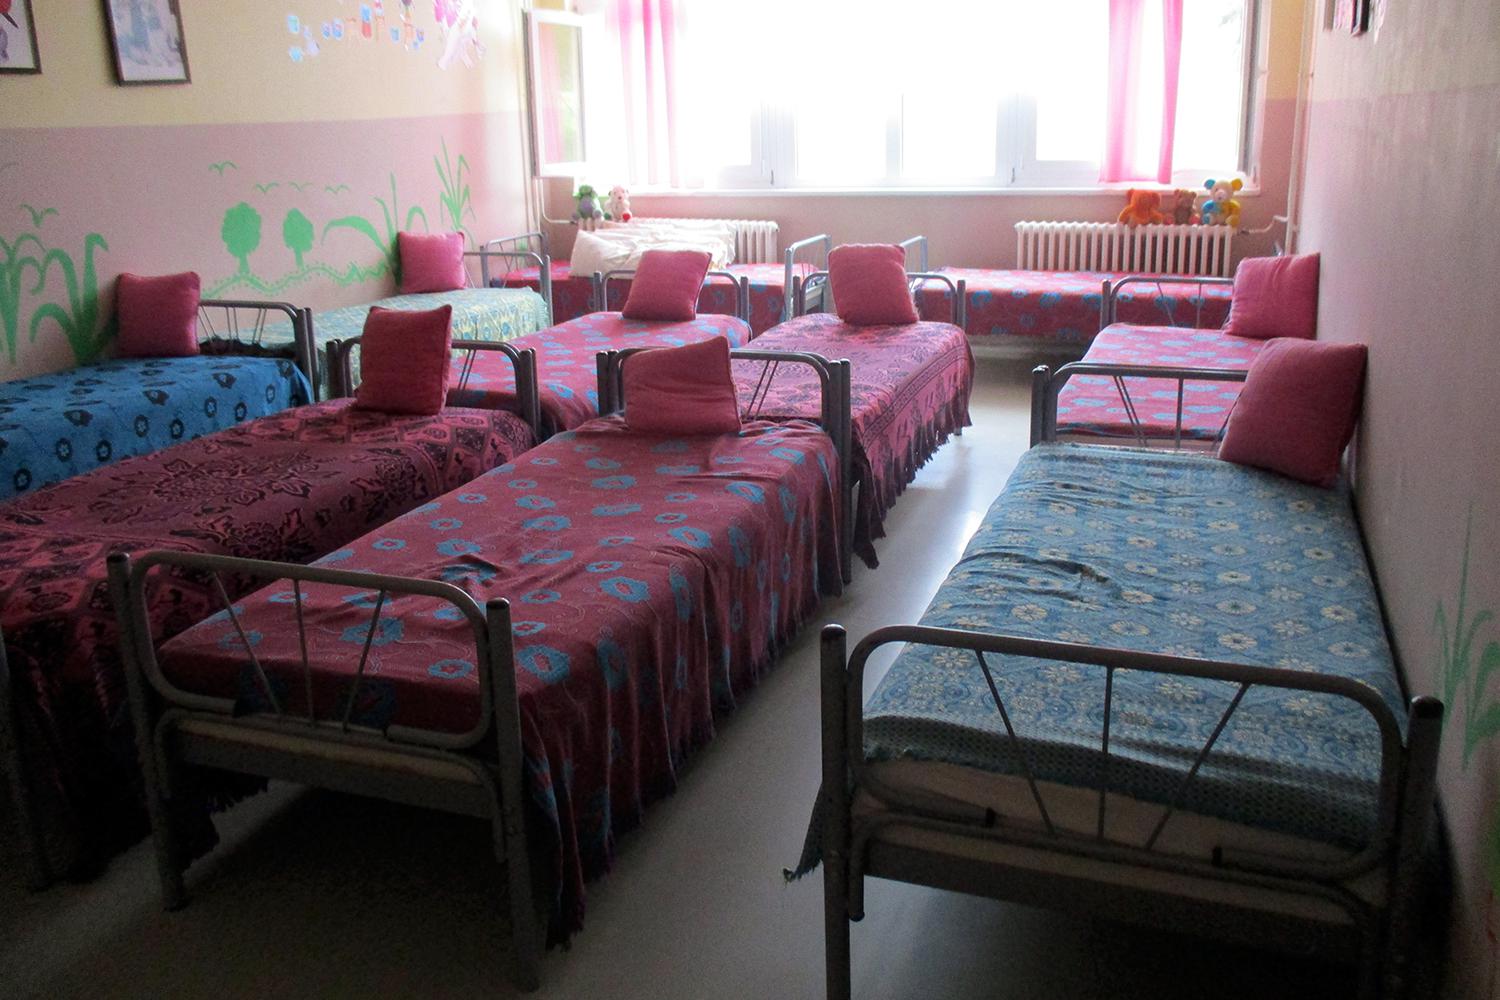 A room in the Sremčica Home for children and adults with disabilities where 292 persons, including 49 children, with disabilities live. Up to 10 people live in one room. © 2015 Emina Ćerimović for Human Rights Watch